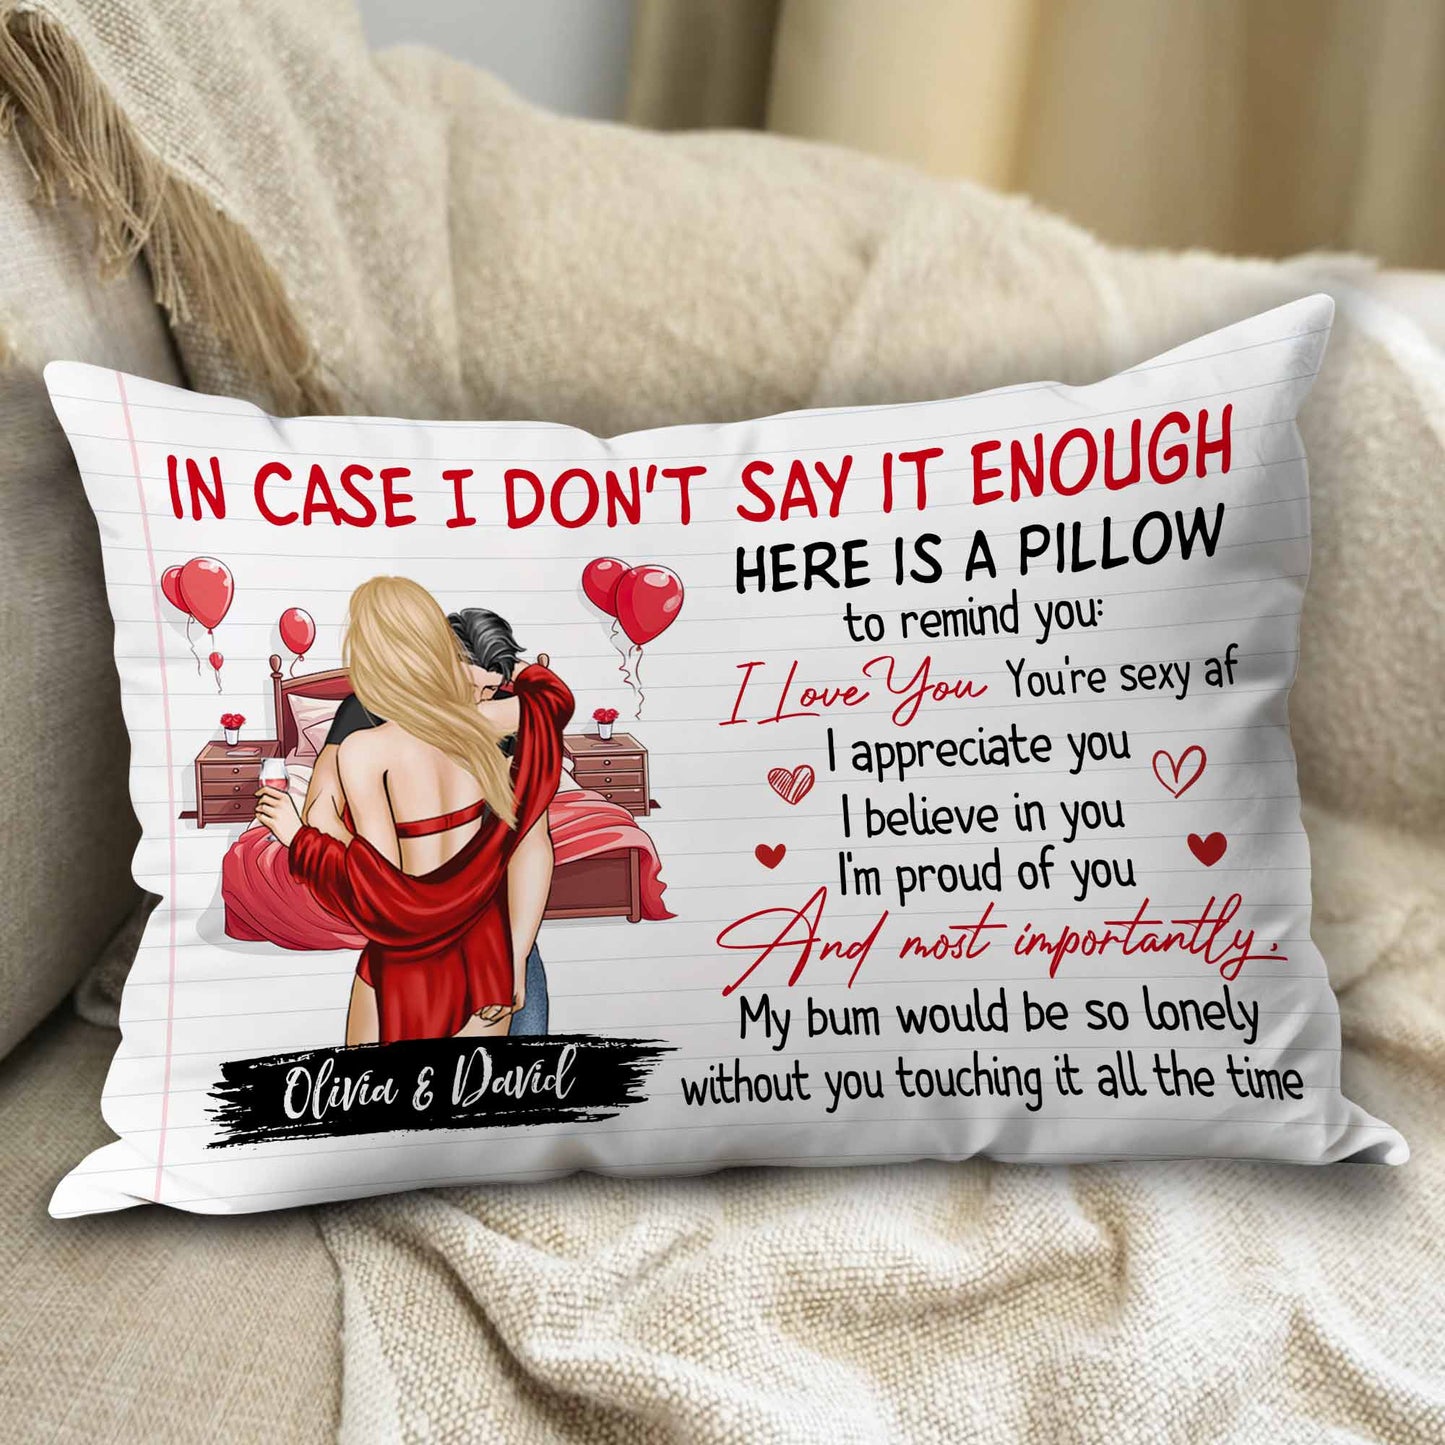 Here Is A Pillow To Remind You - Personalized Custom Shaped Pillow